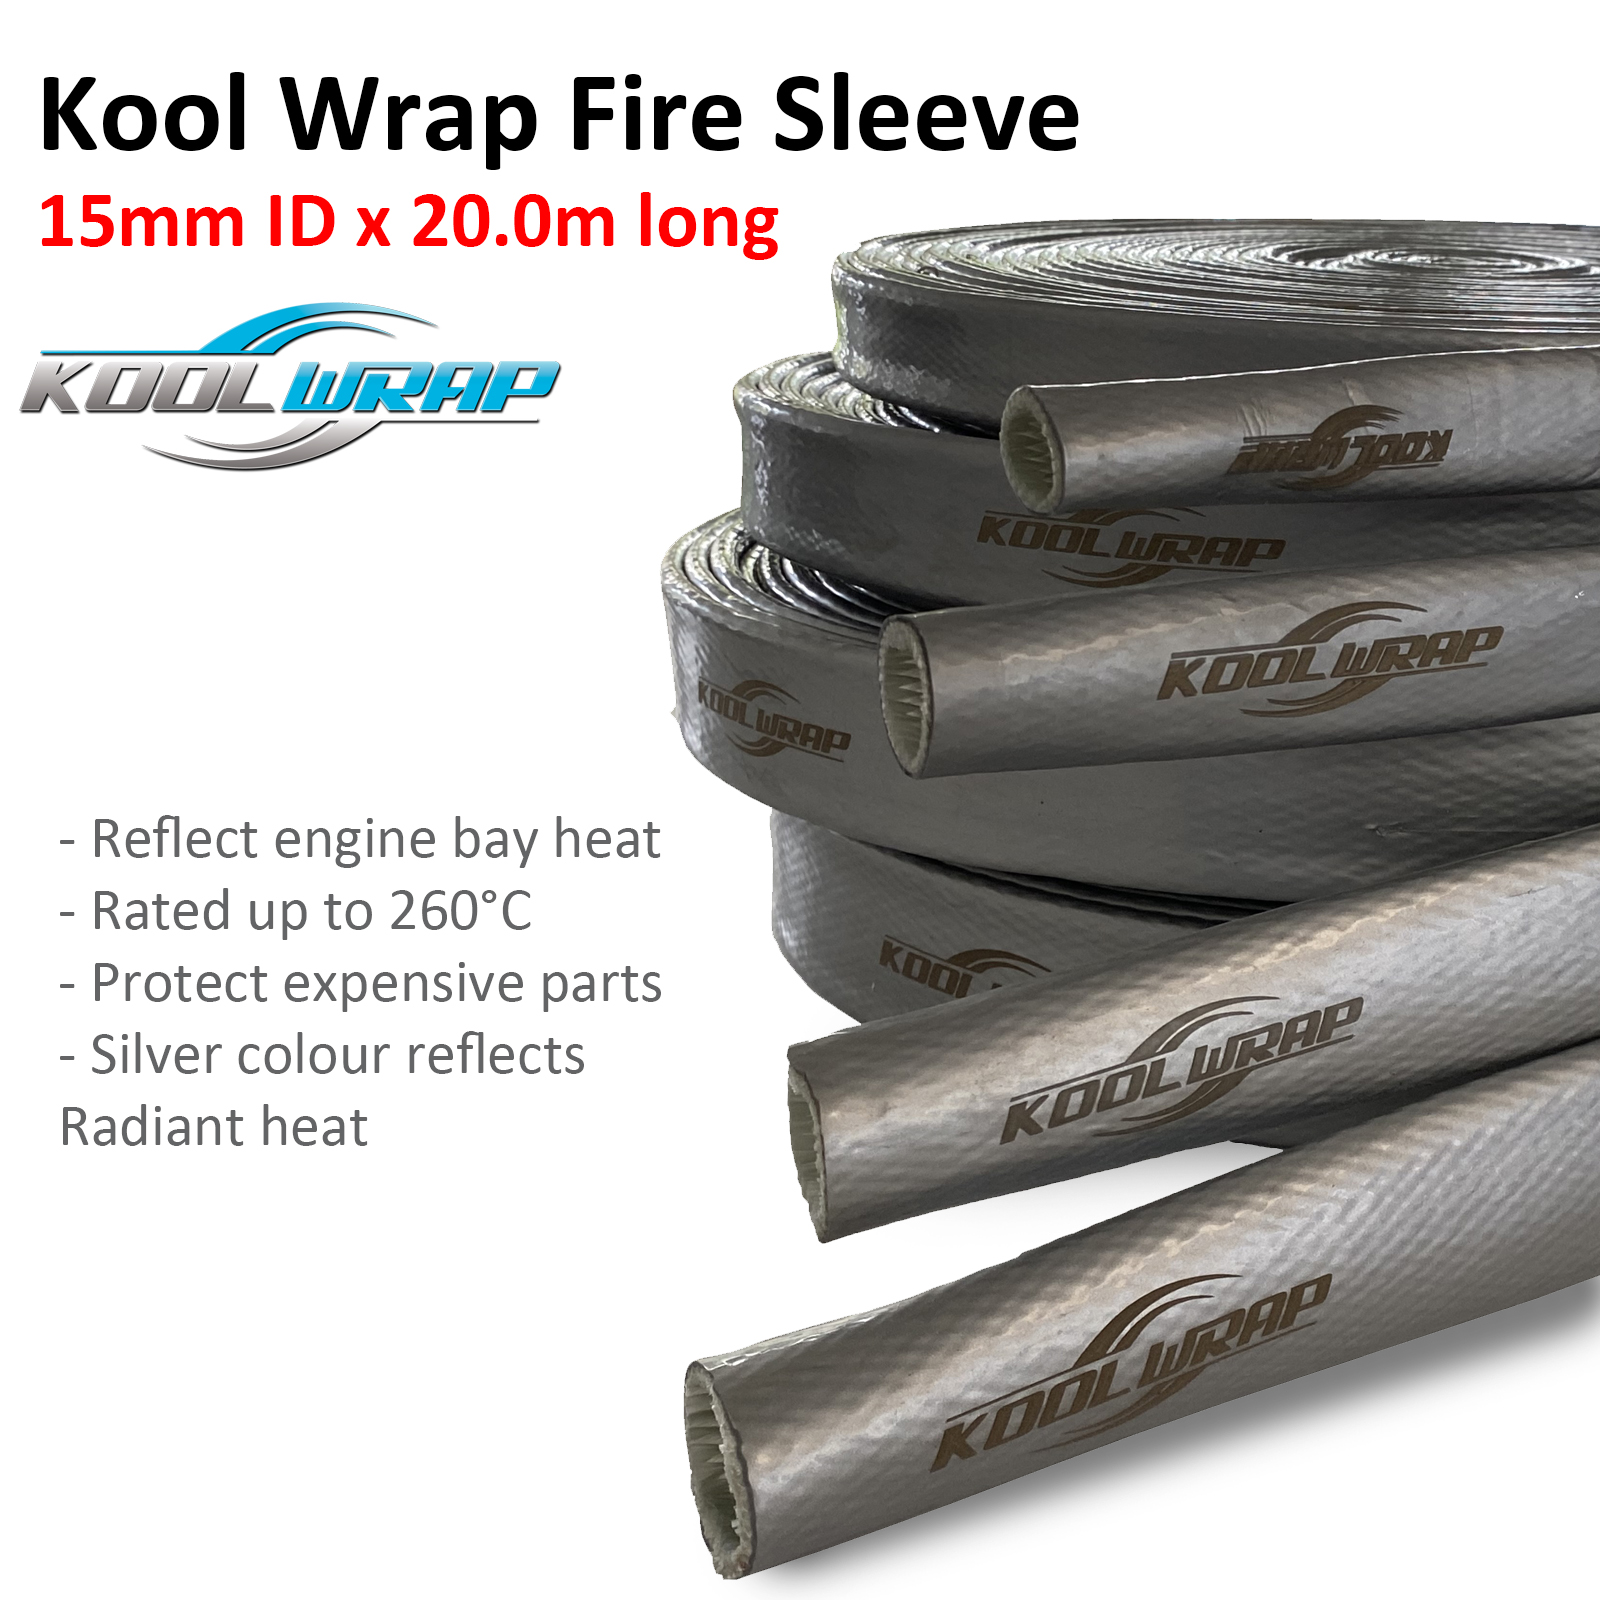 Kool Wrap Silicone Coated Heat Resistant Fire Sleeve 15mm x 20mID logo